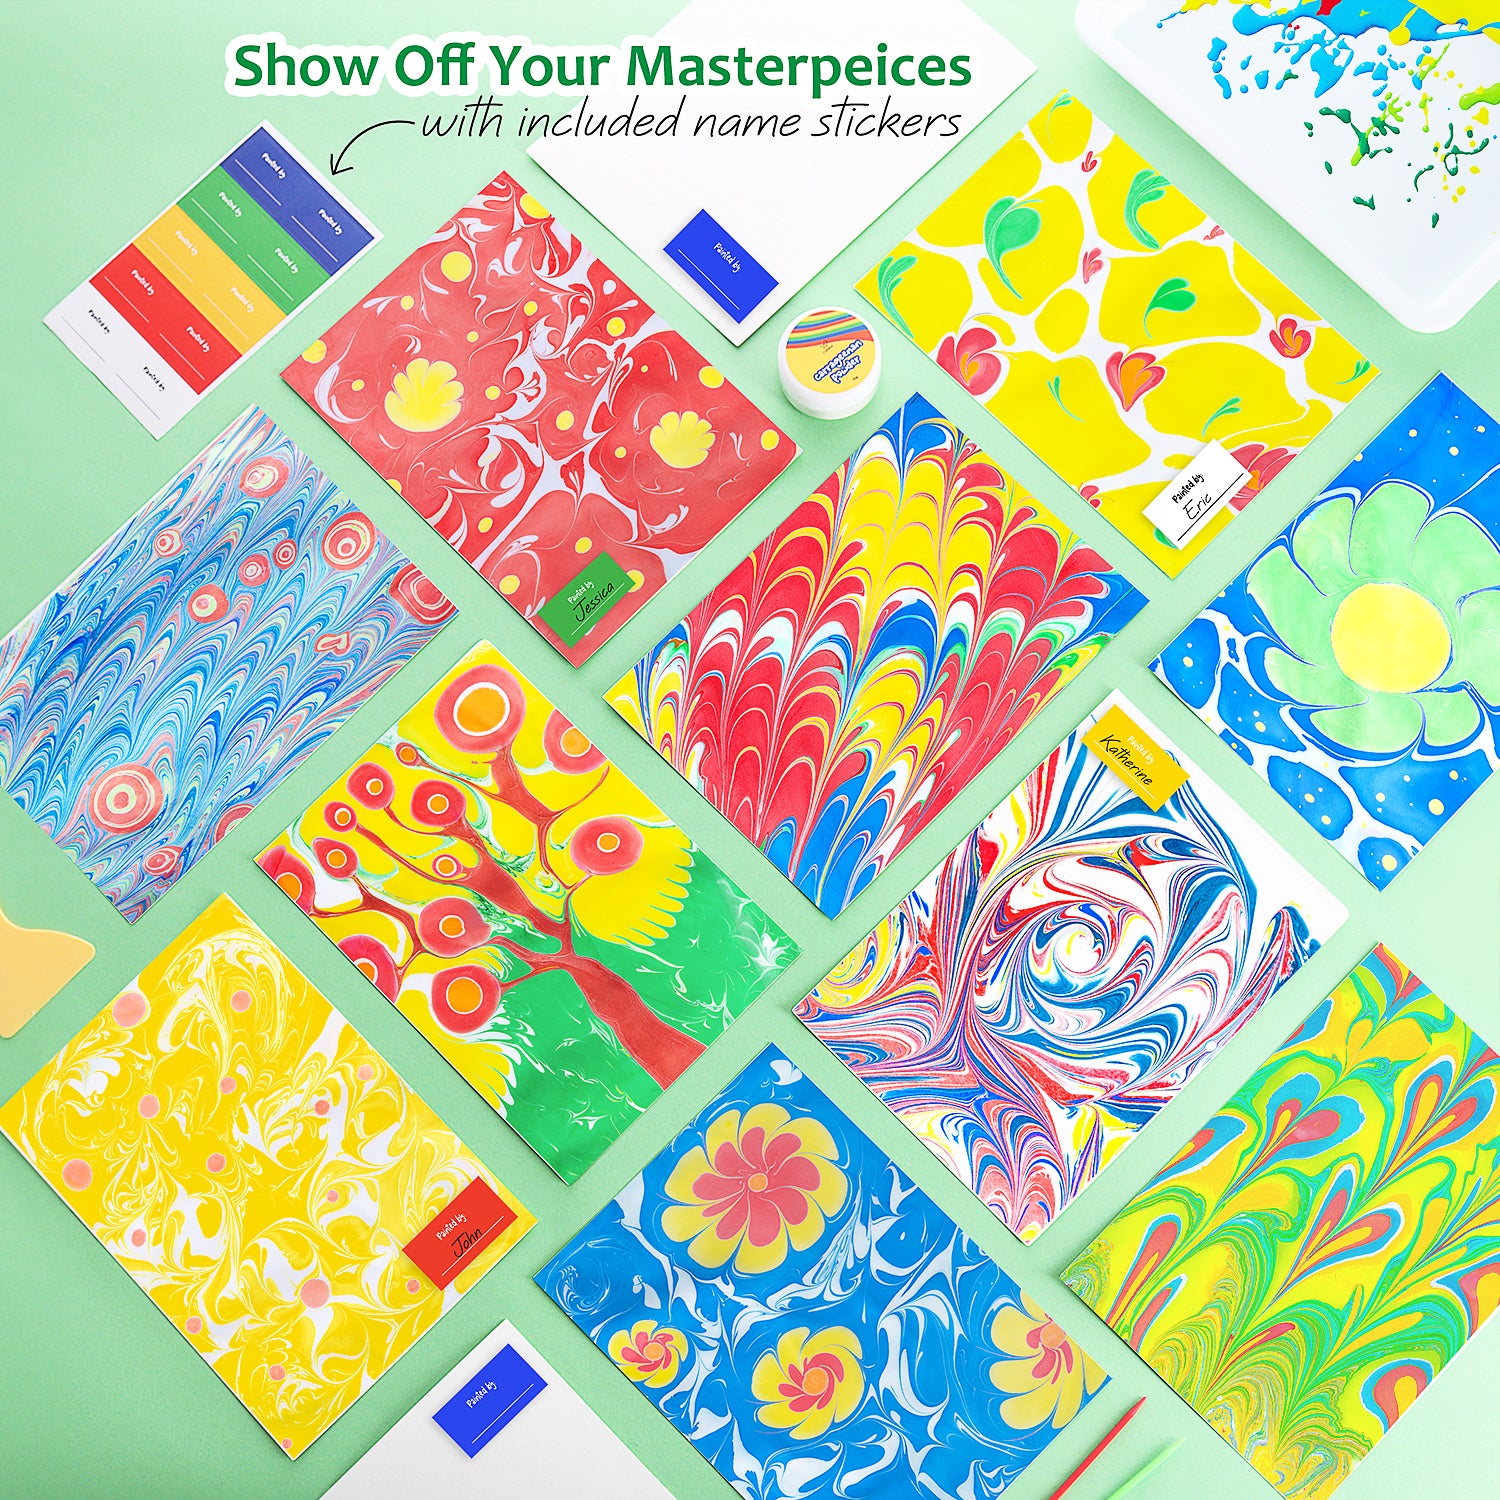 Marble Painting Kit for Kids - Momgineering the Future ®